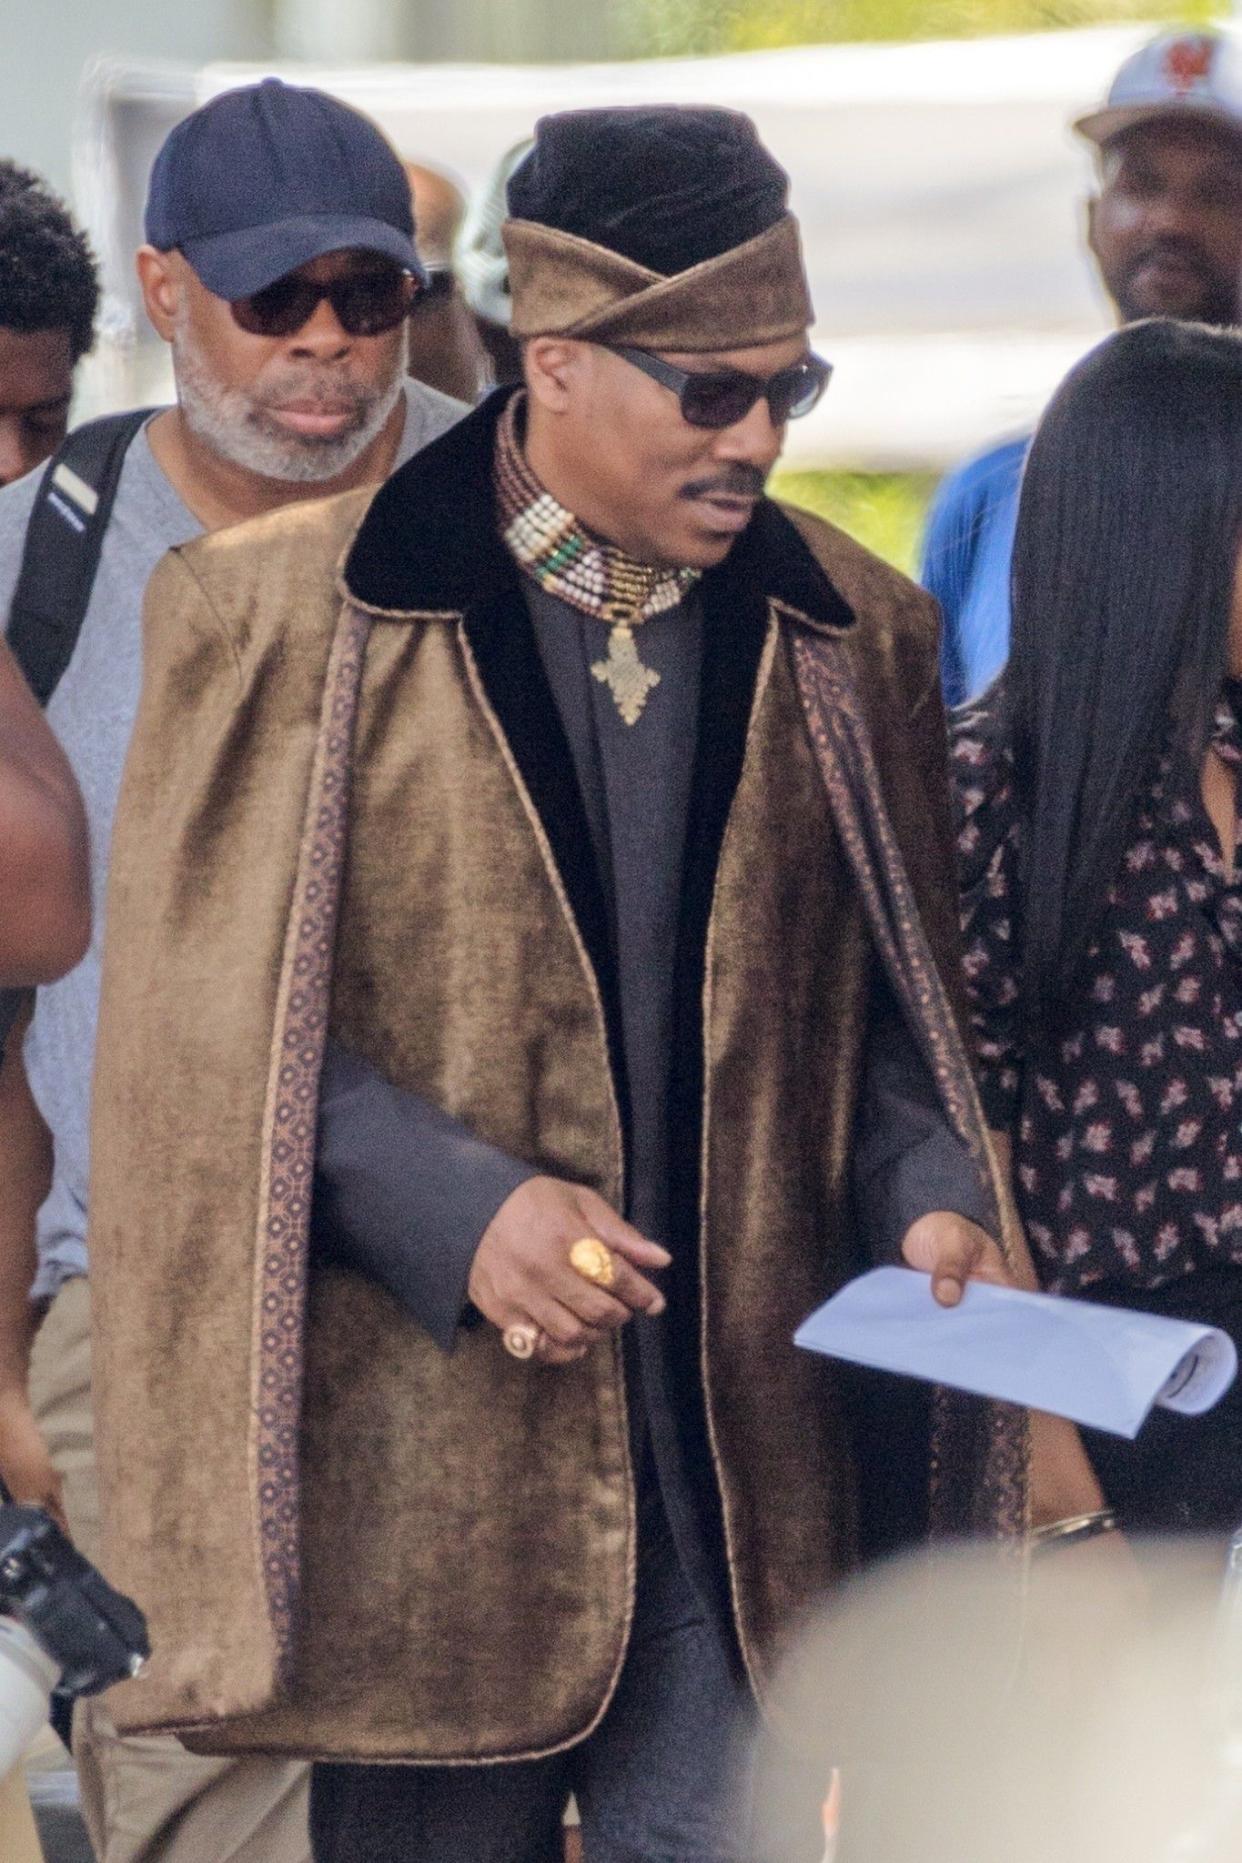 Murphy was also seen in character on set on Friday, dressed as Prince Akeem in head-to-toe royal regalia. “Coming 2 America” will follow Akeem and Semmi, Hall’s main character, returning to Queens, New York looking for Akeem’s son.